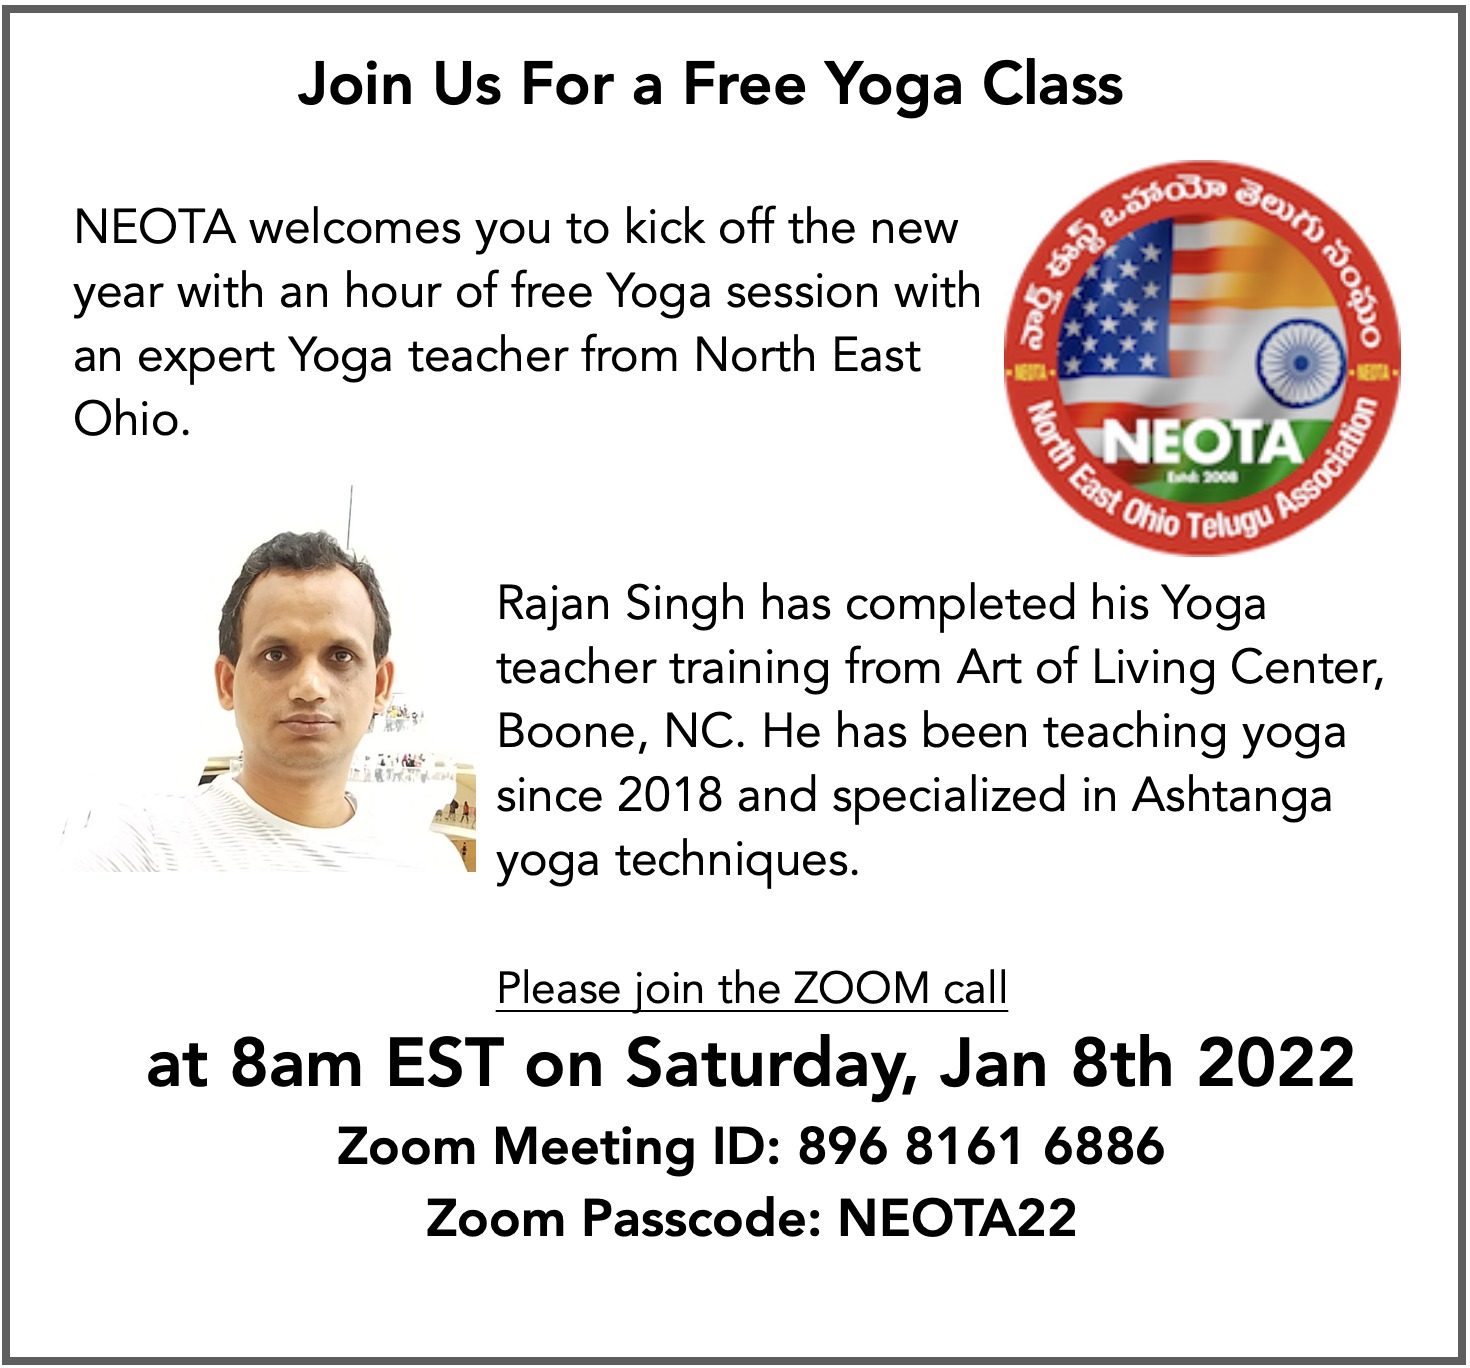 Free Yoga Class on Jan 8th 2022 at 8am